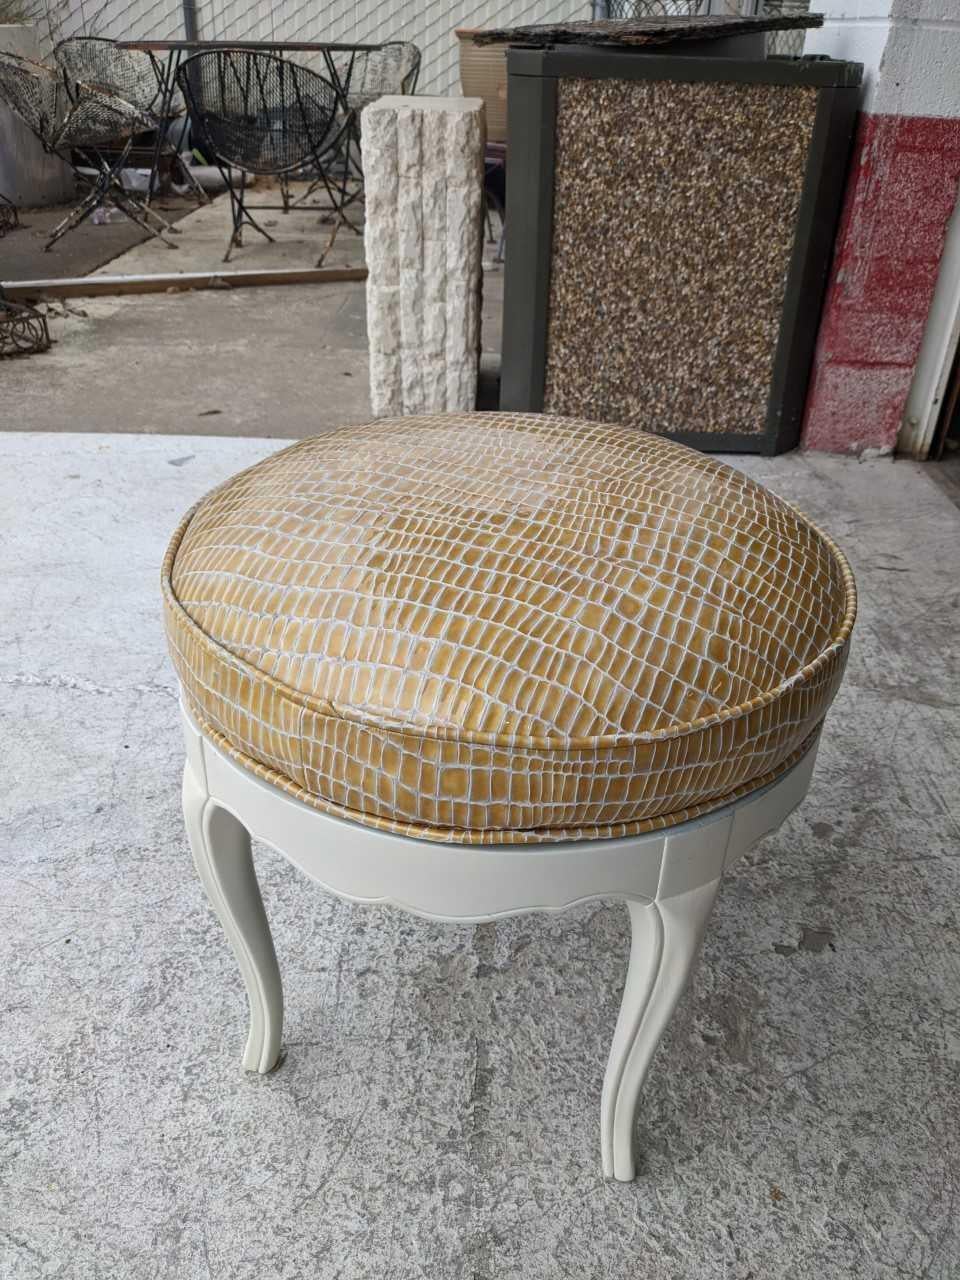 A glamorous antique swivel stool restored in a rich patent leather stamped in a reptile pattern. Base is painted in an antique white matte finish.

